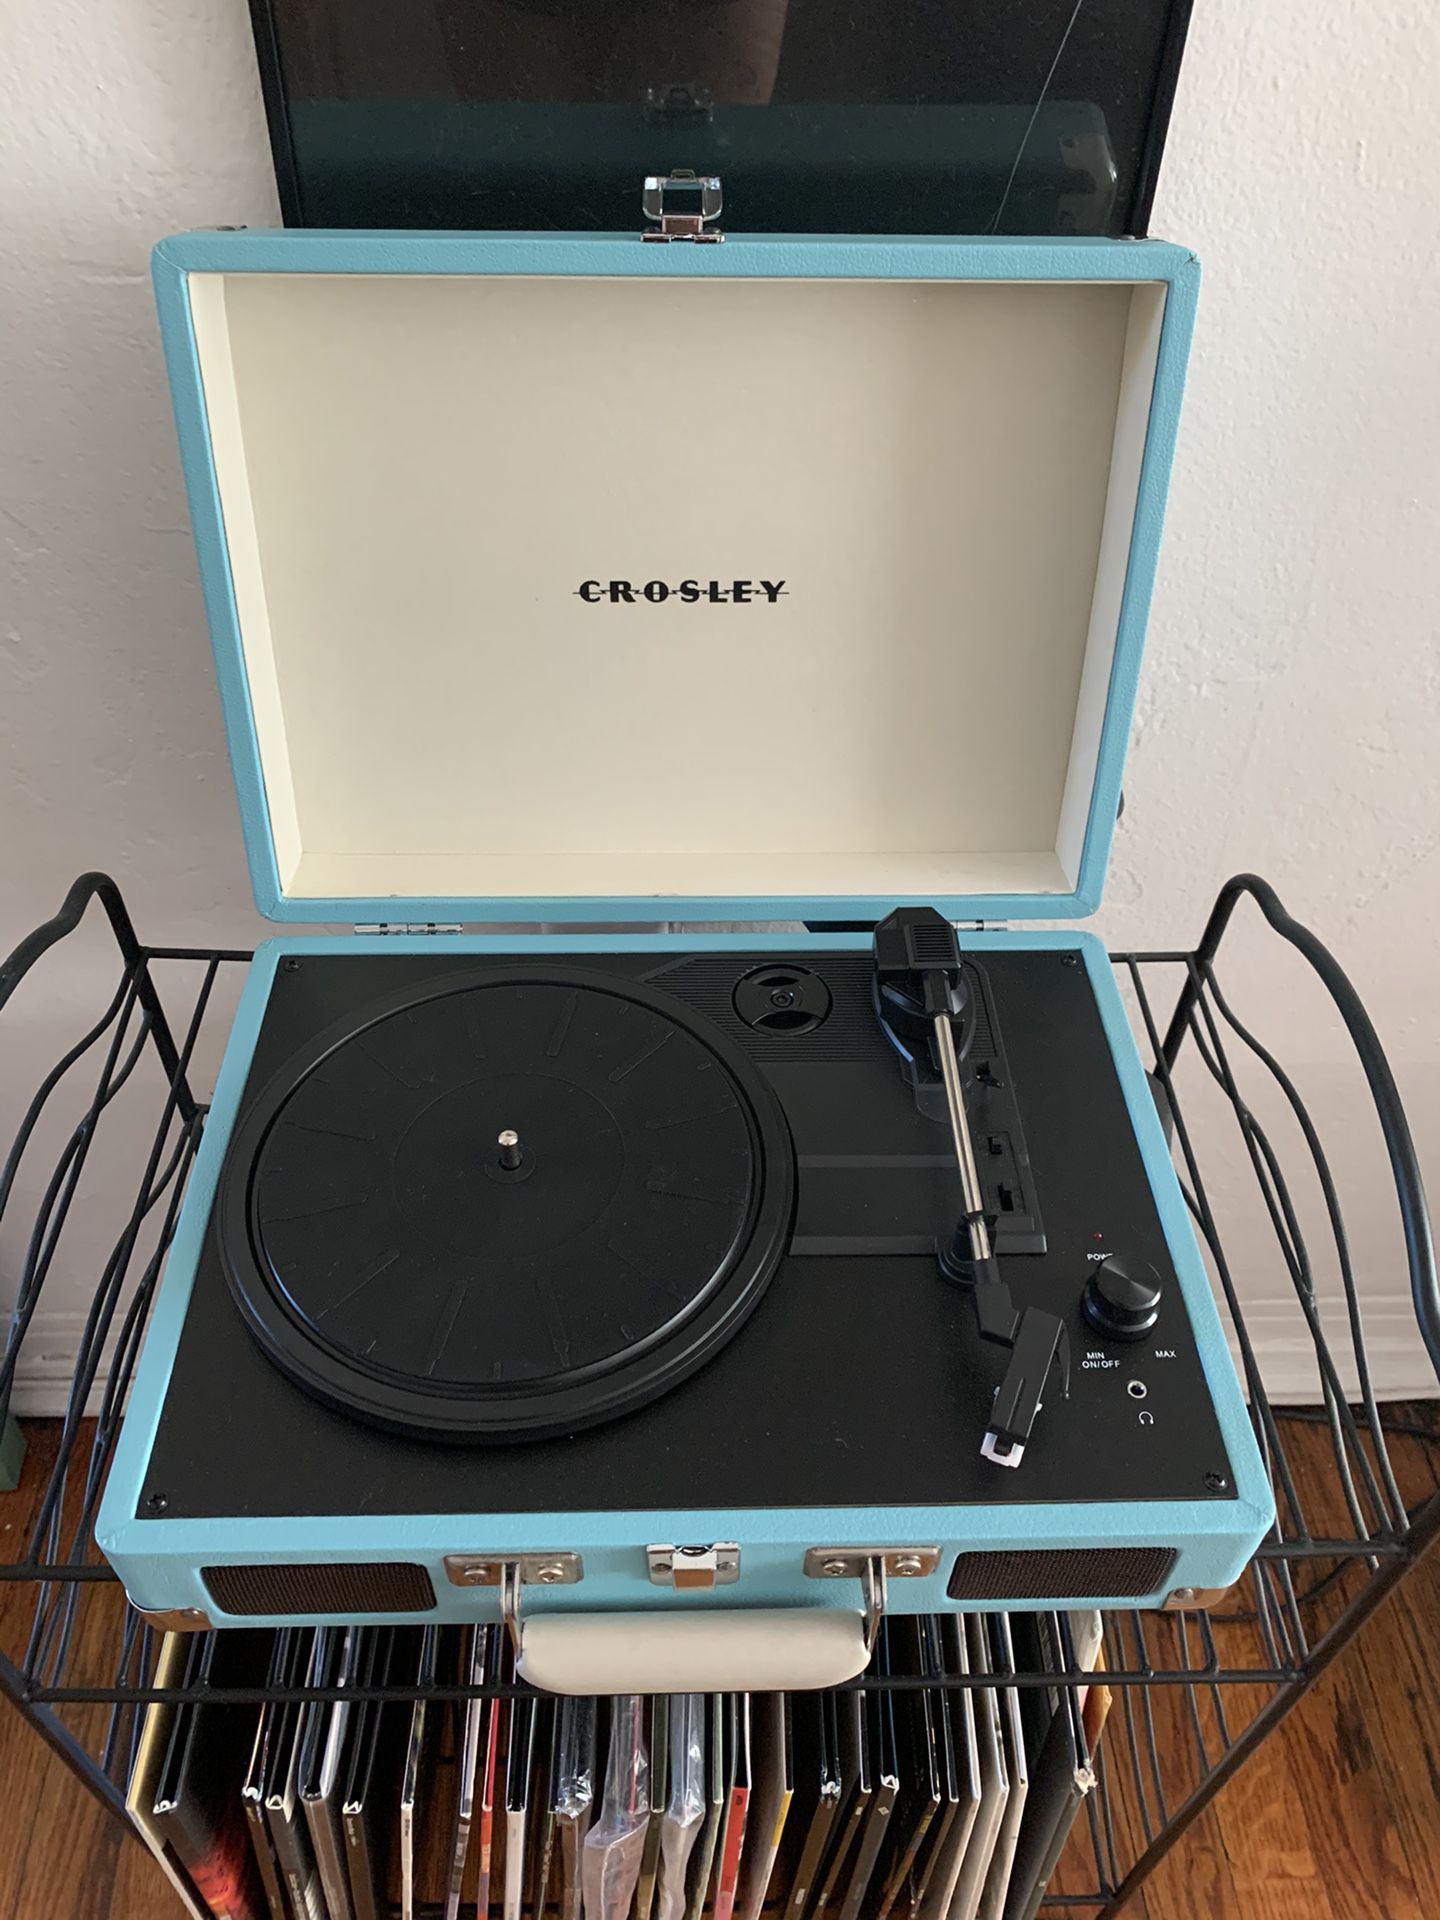 Crosley light blue/teal portable record player